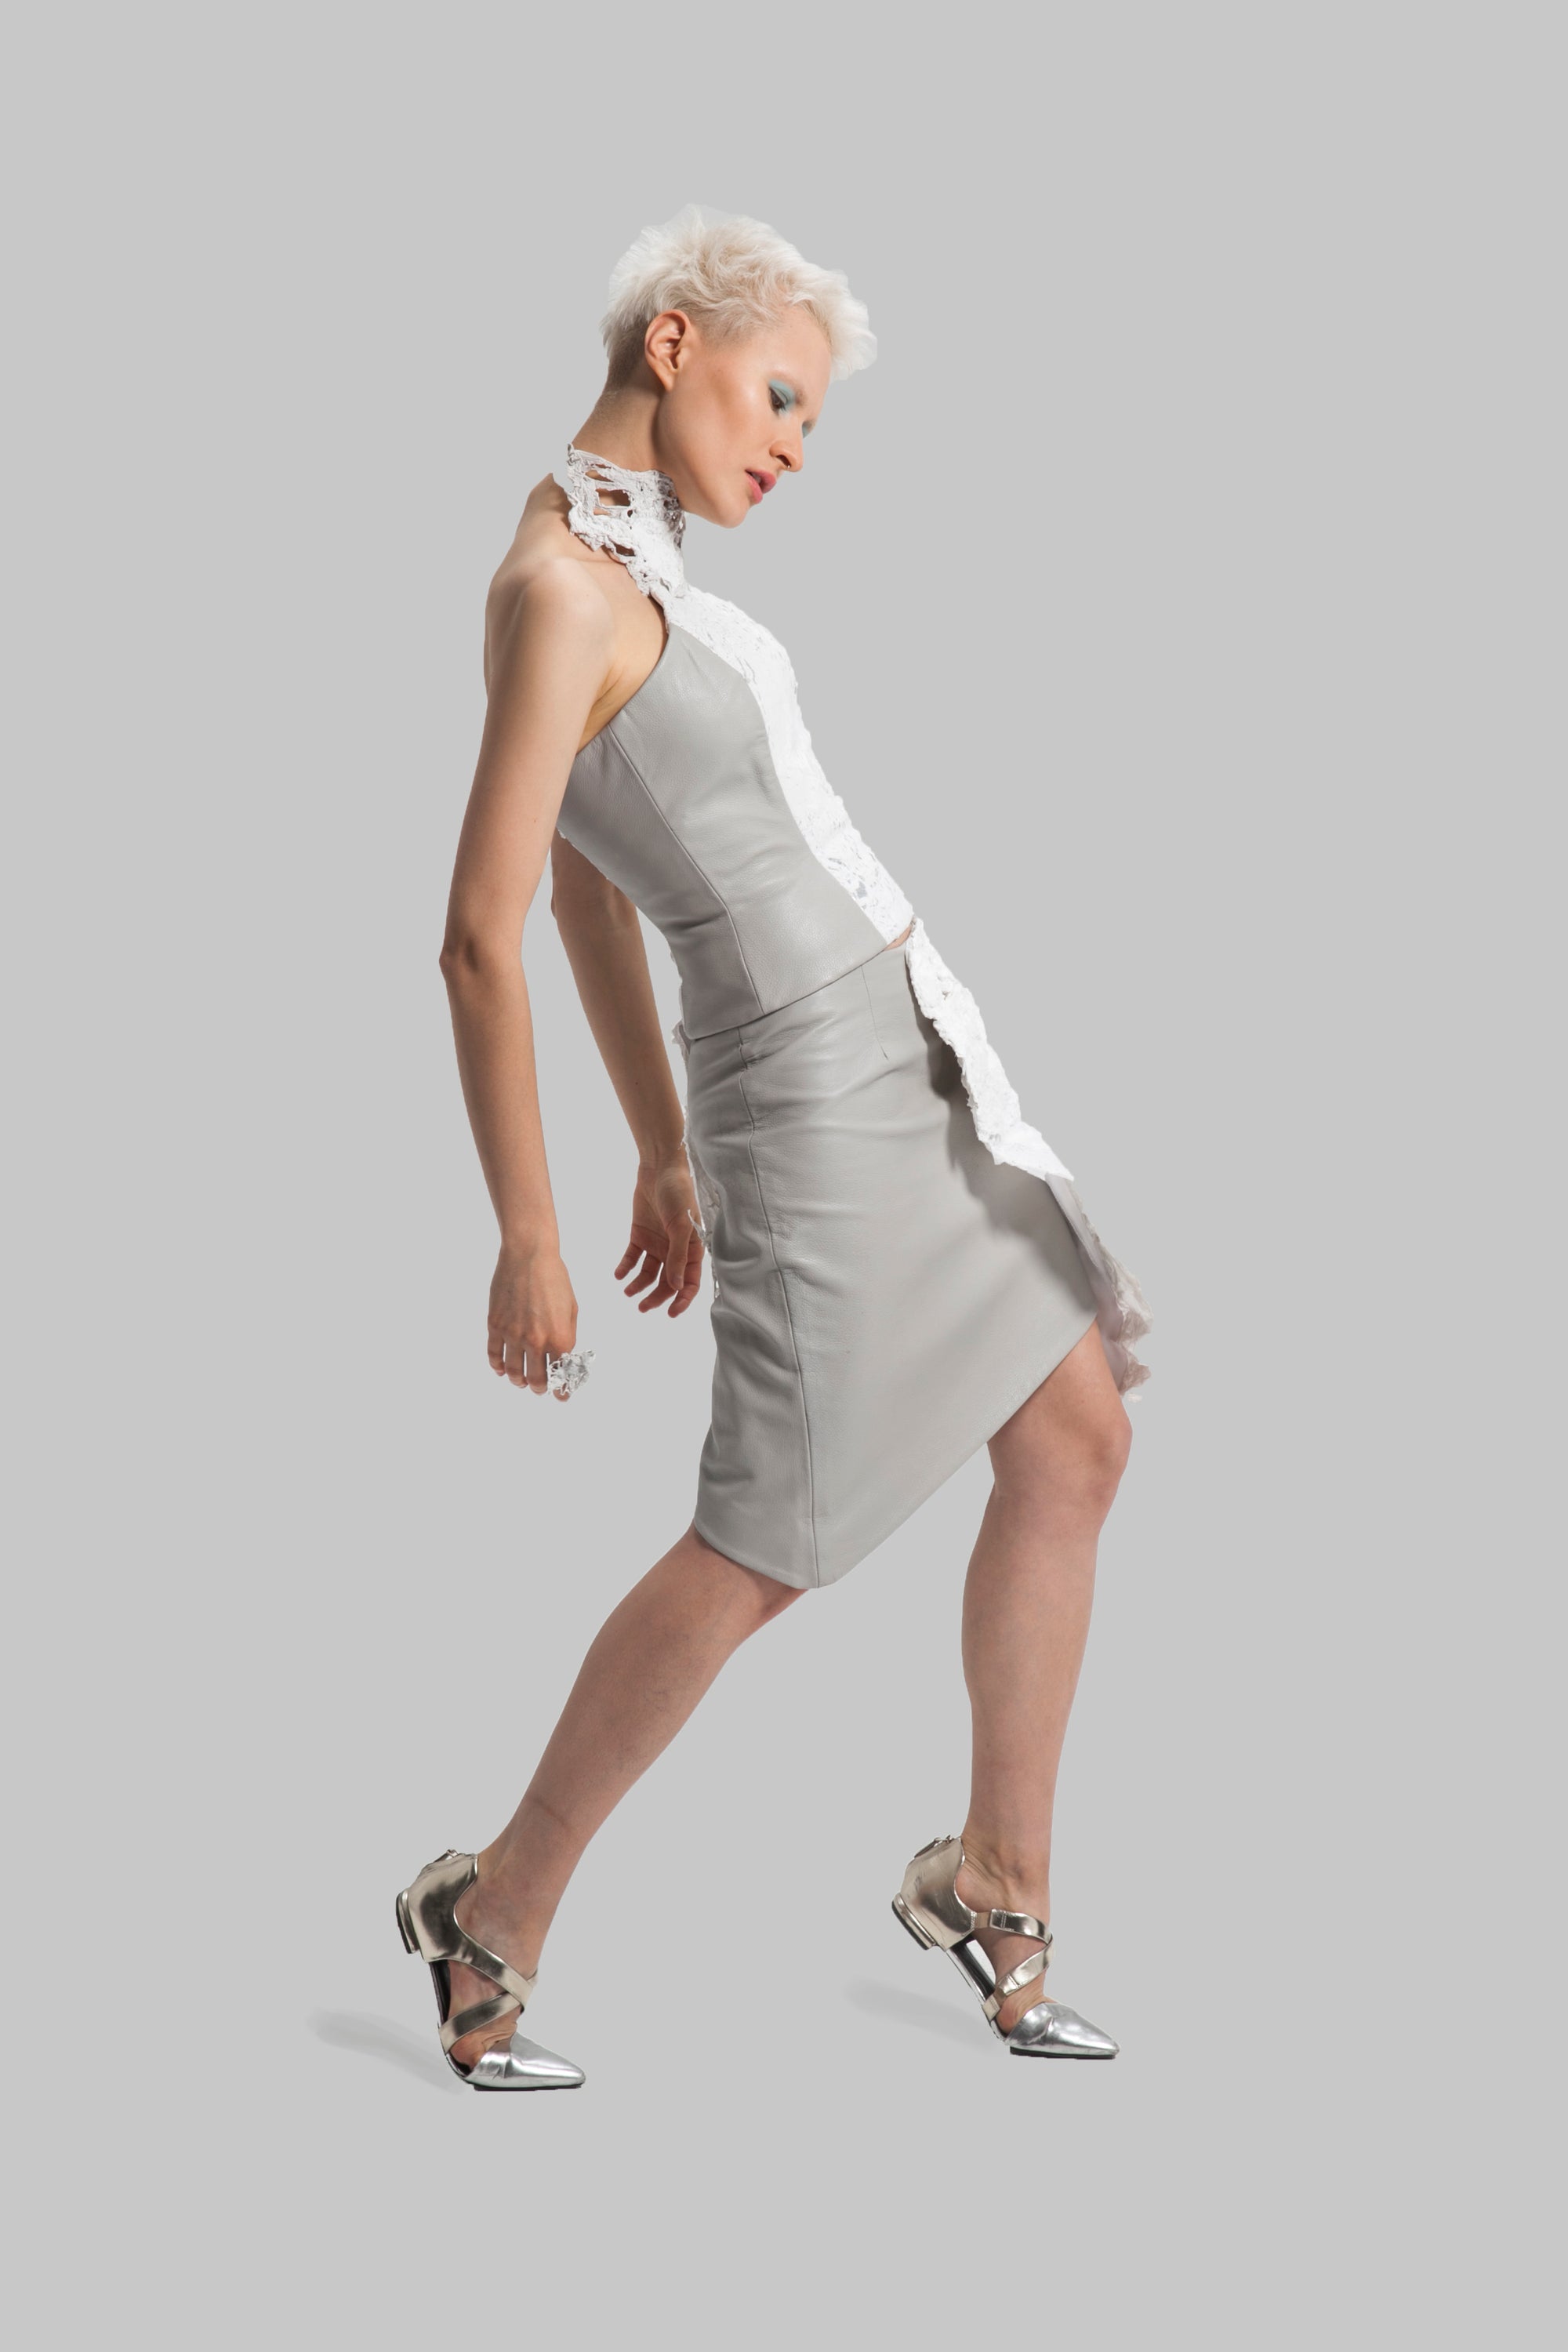 A grey asymmetrical skirt and a corset with details of up-cycled plastic bags as embellishments